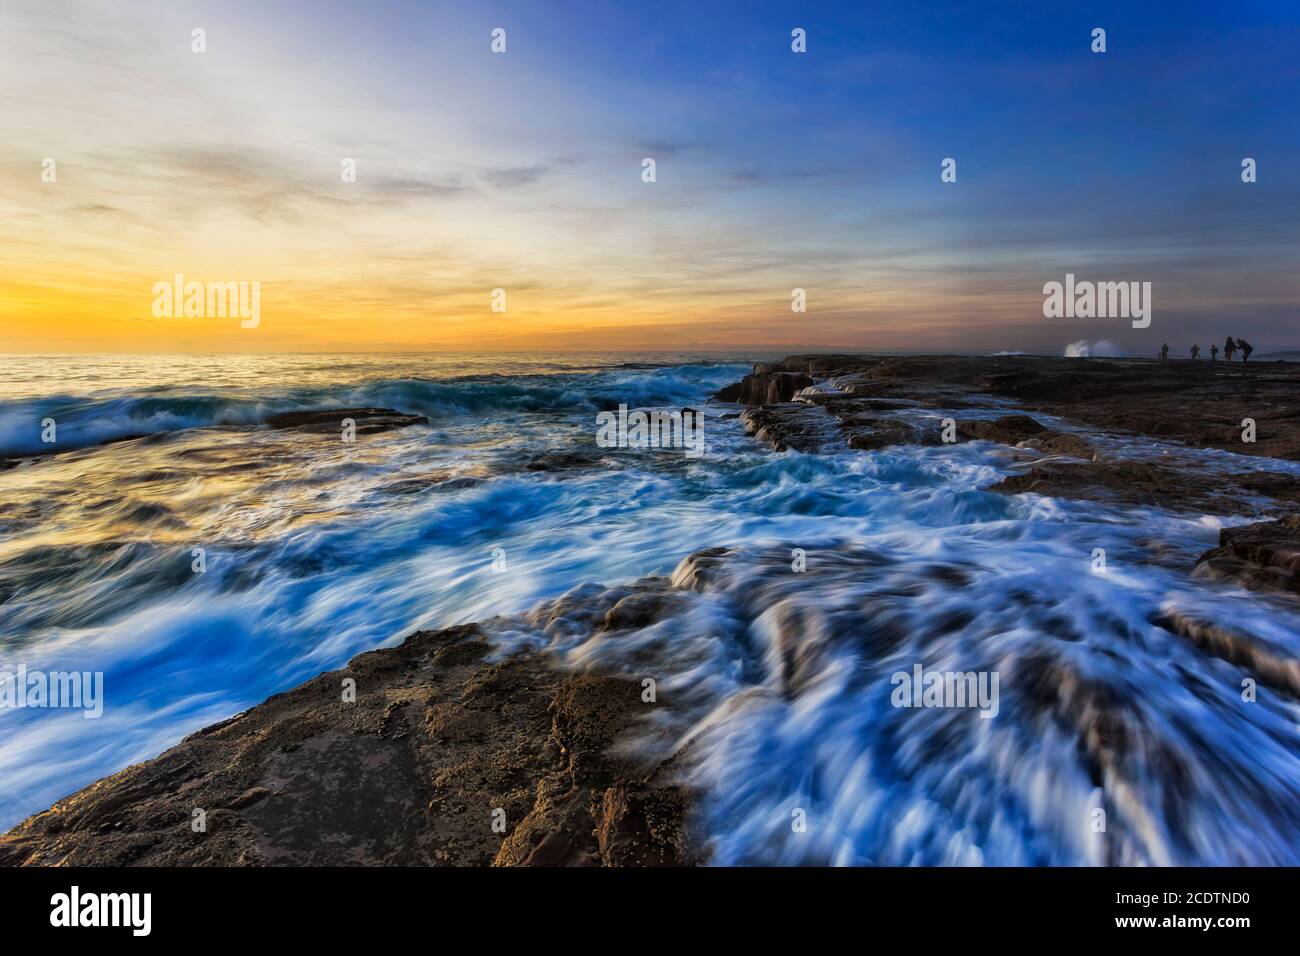 Photographers shooting sunrise at Northern beaches of Sydney - scenic Pacific ocean coast. Stock Photo